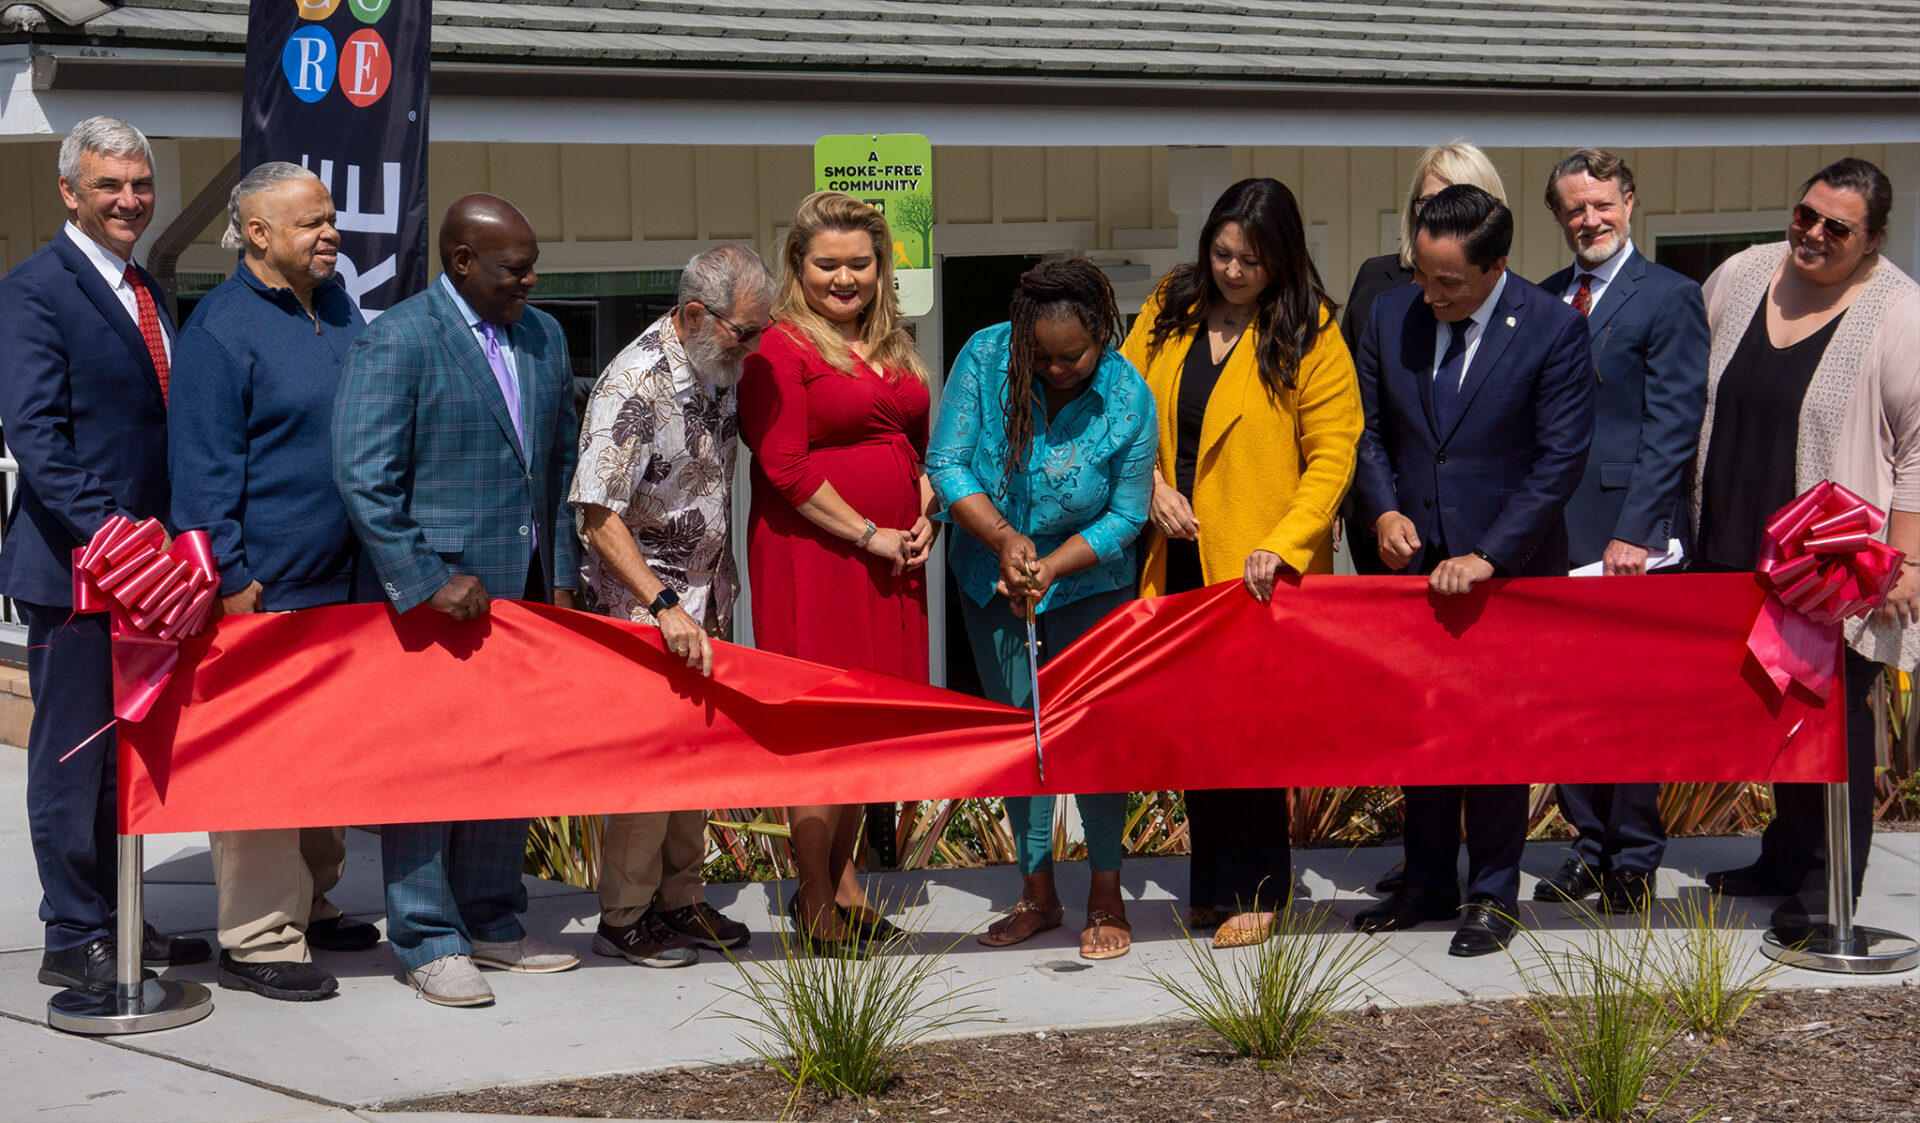 Grand Opening Celebrates 73 New Affordable Studio Apartments for Seniors Who Experienced Homelessness